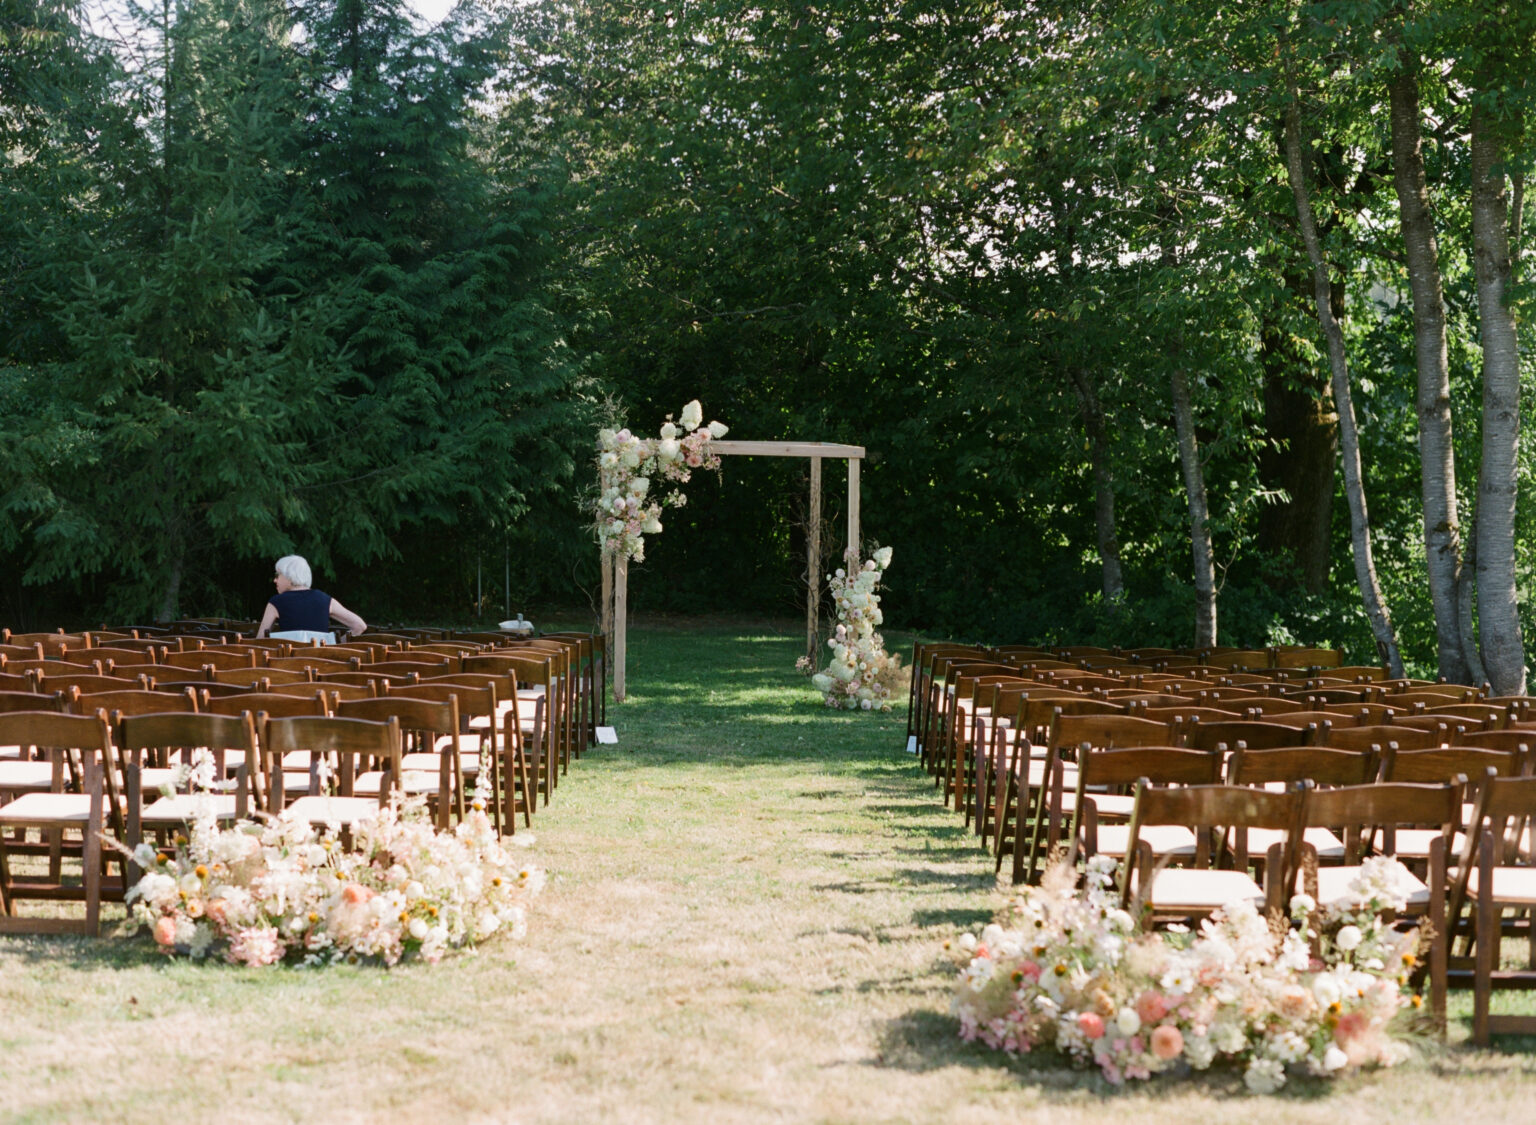 Chuppah Floral Installation for a Summer Wedding designed by Seattle wedding florist Noctua Florals